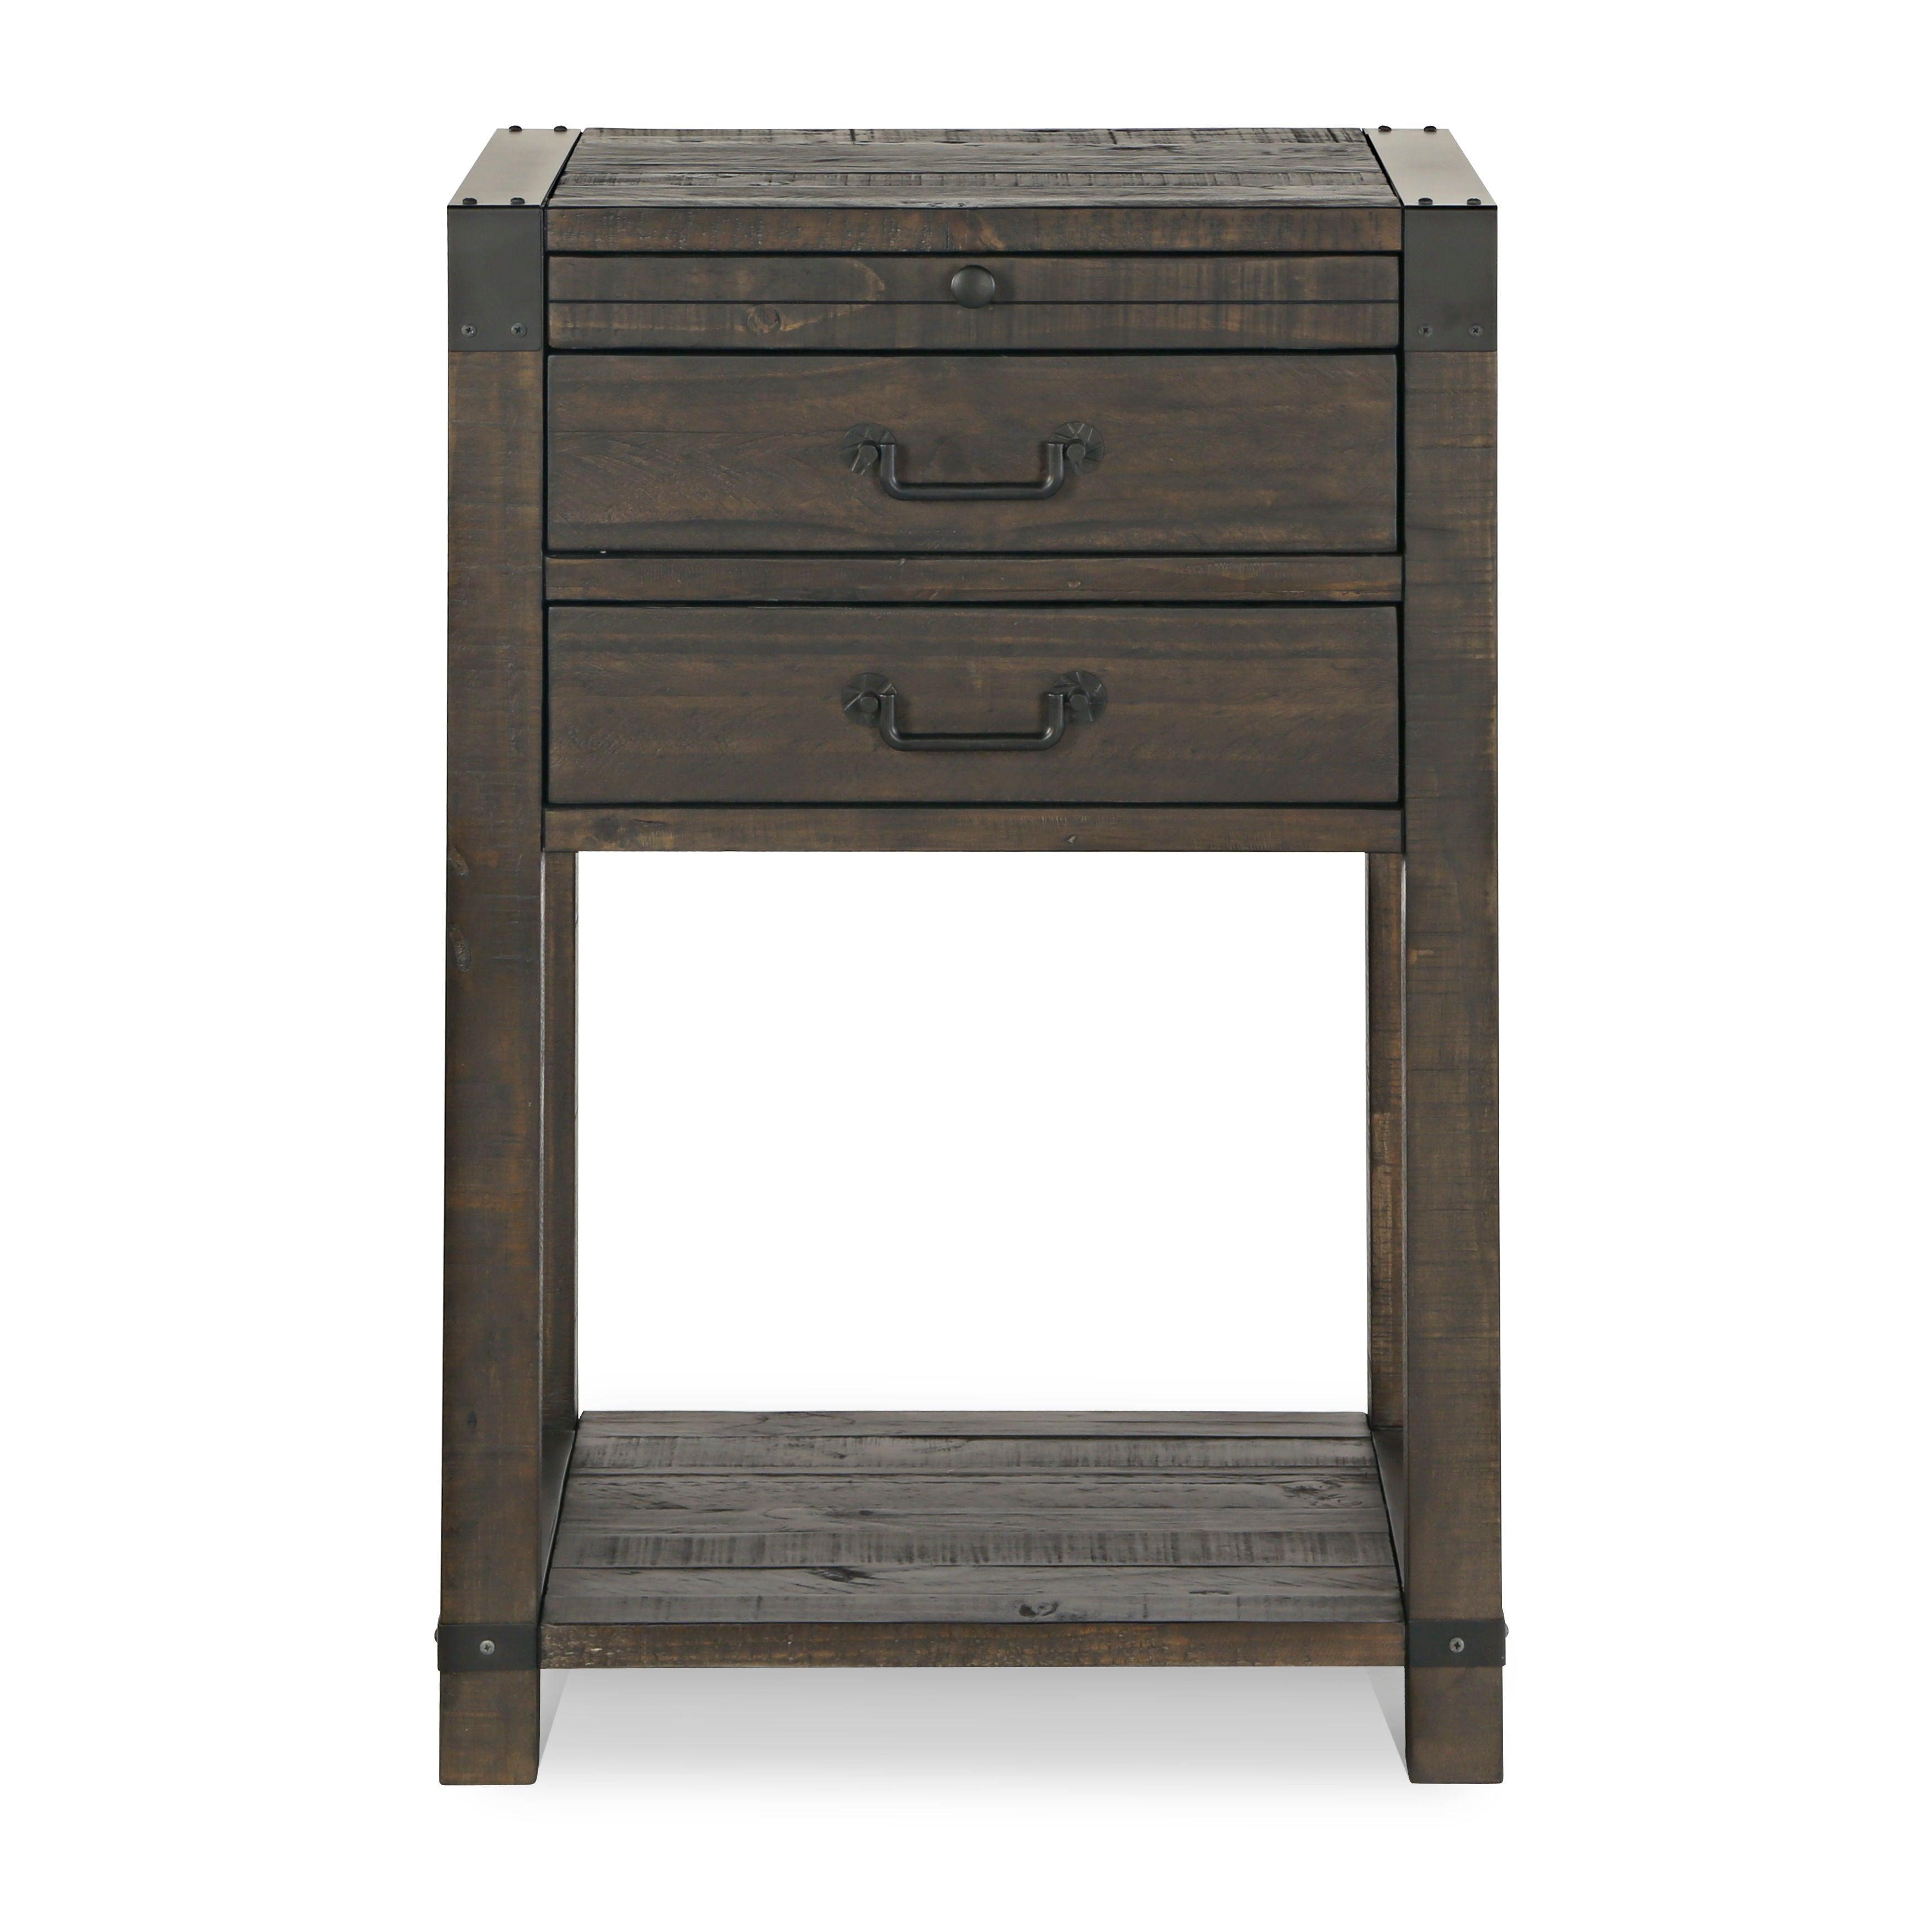 Magnussen Furniture - Abington - 2 Drawer Open Nightstand - Weathered Charcoal - 5th Avenue Furniture